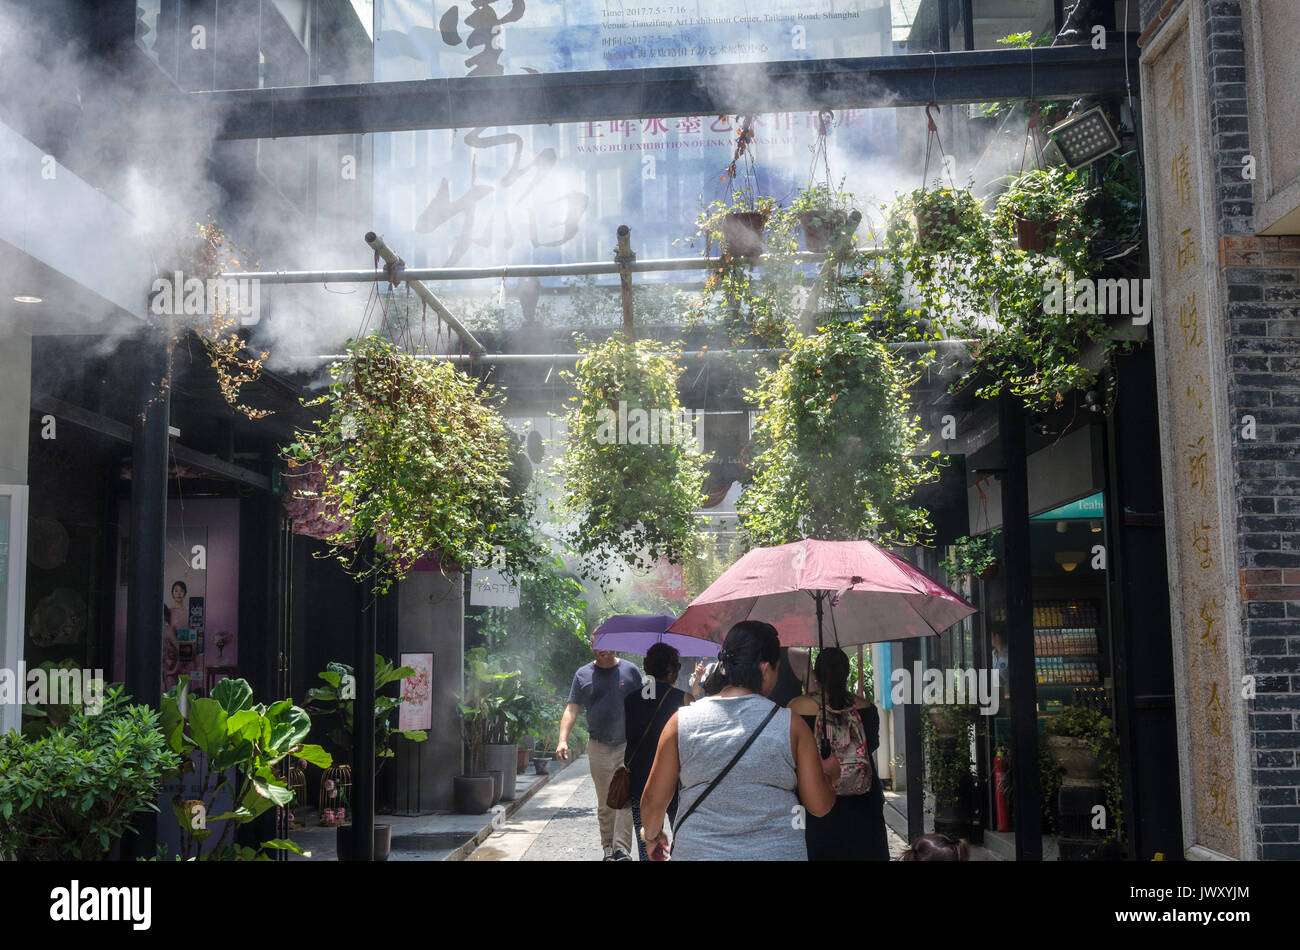 Tourists wander the streets of Tianzifang in Shanghai, China. A cooling system sprays a mist to bring relief from the hot sun. Stock Photo